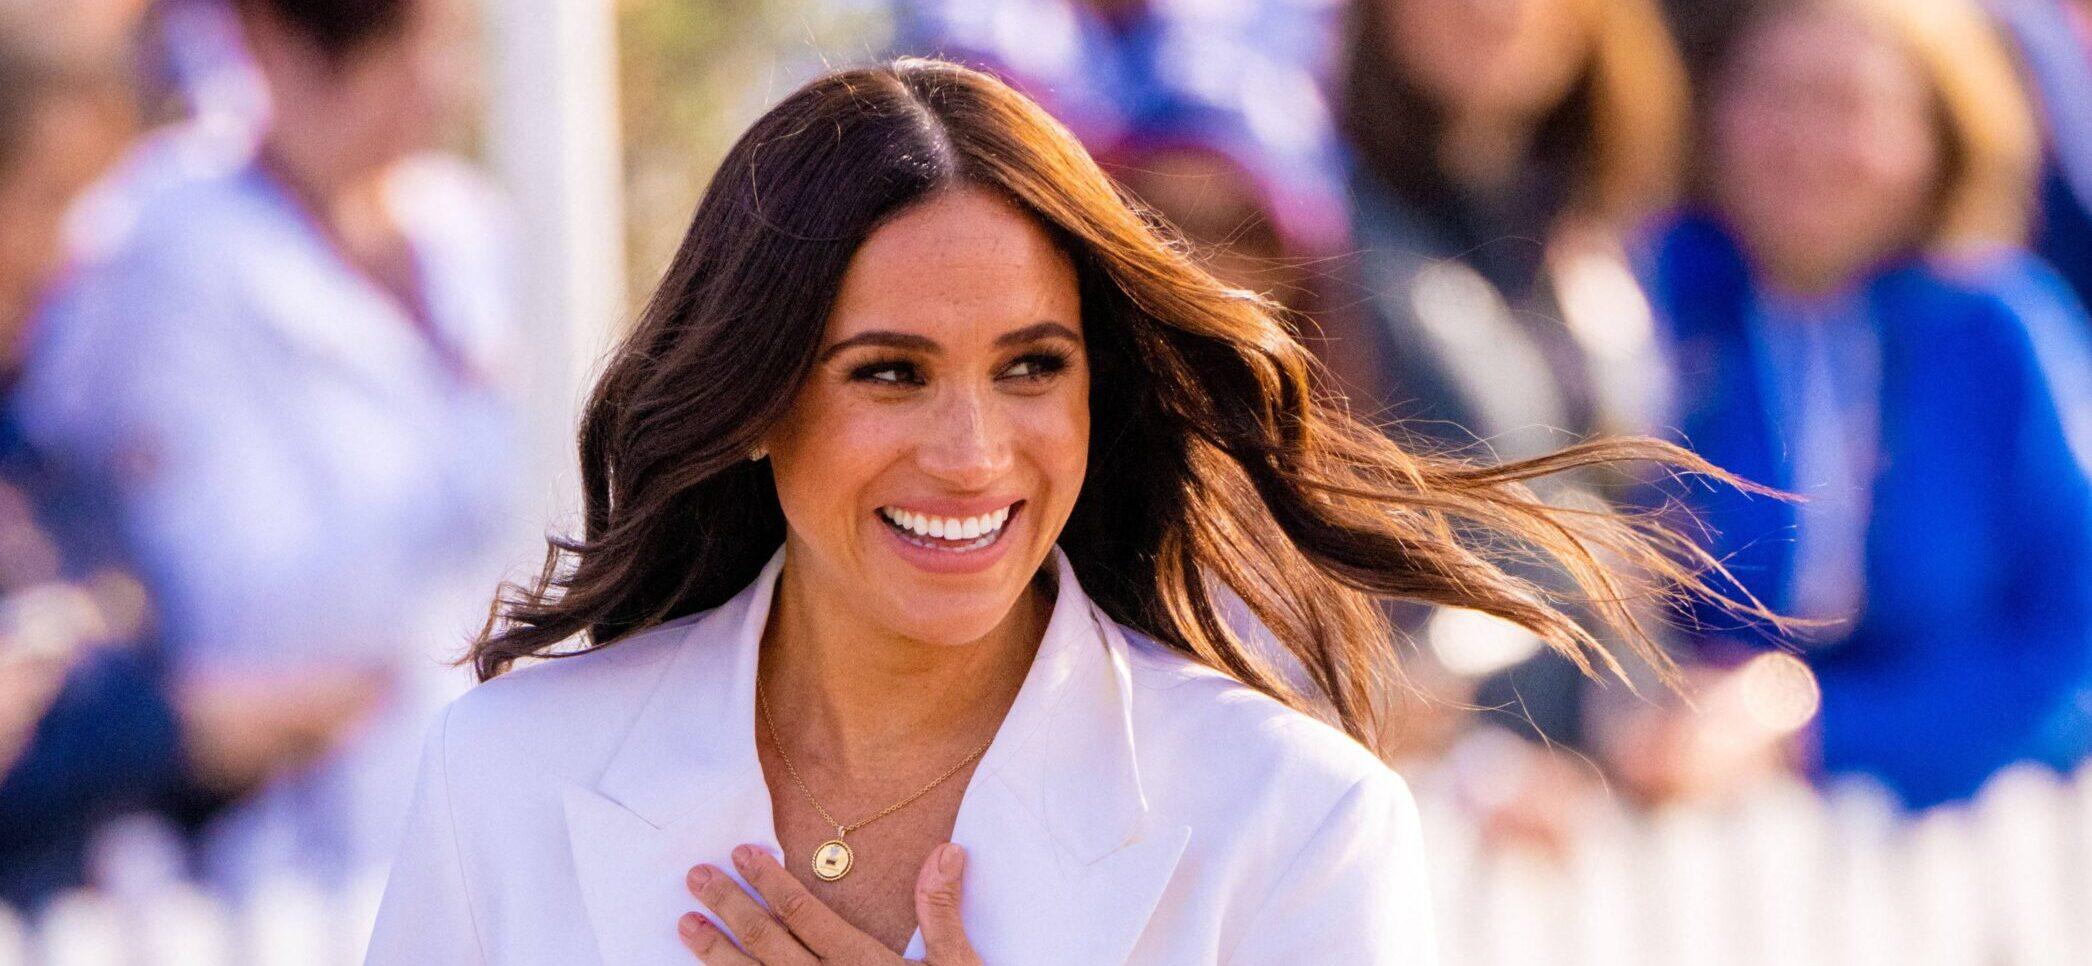 Meghan Markle Spotted With Big Movie Execs Amid Rumours About A Hollywood Producer Career Move